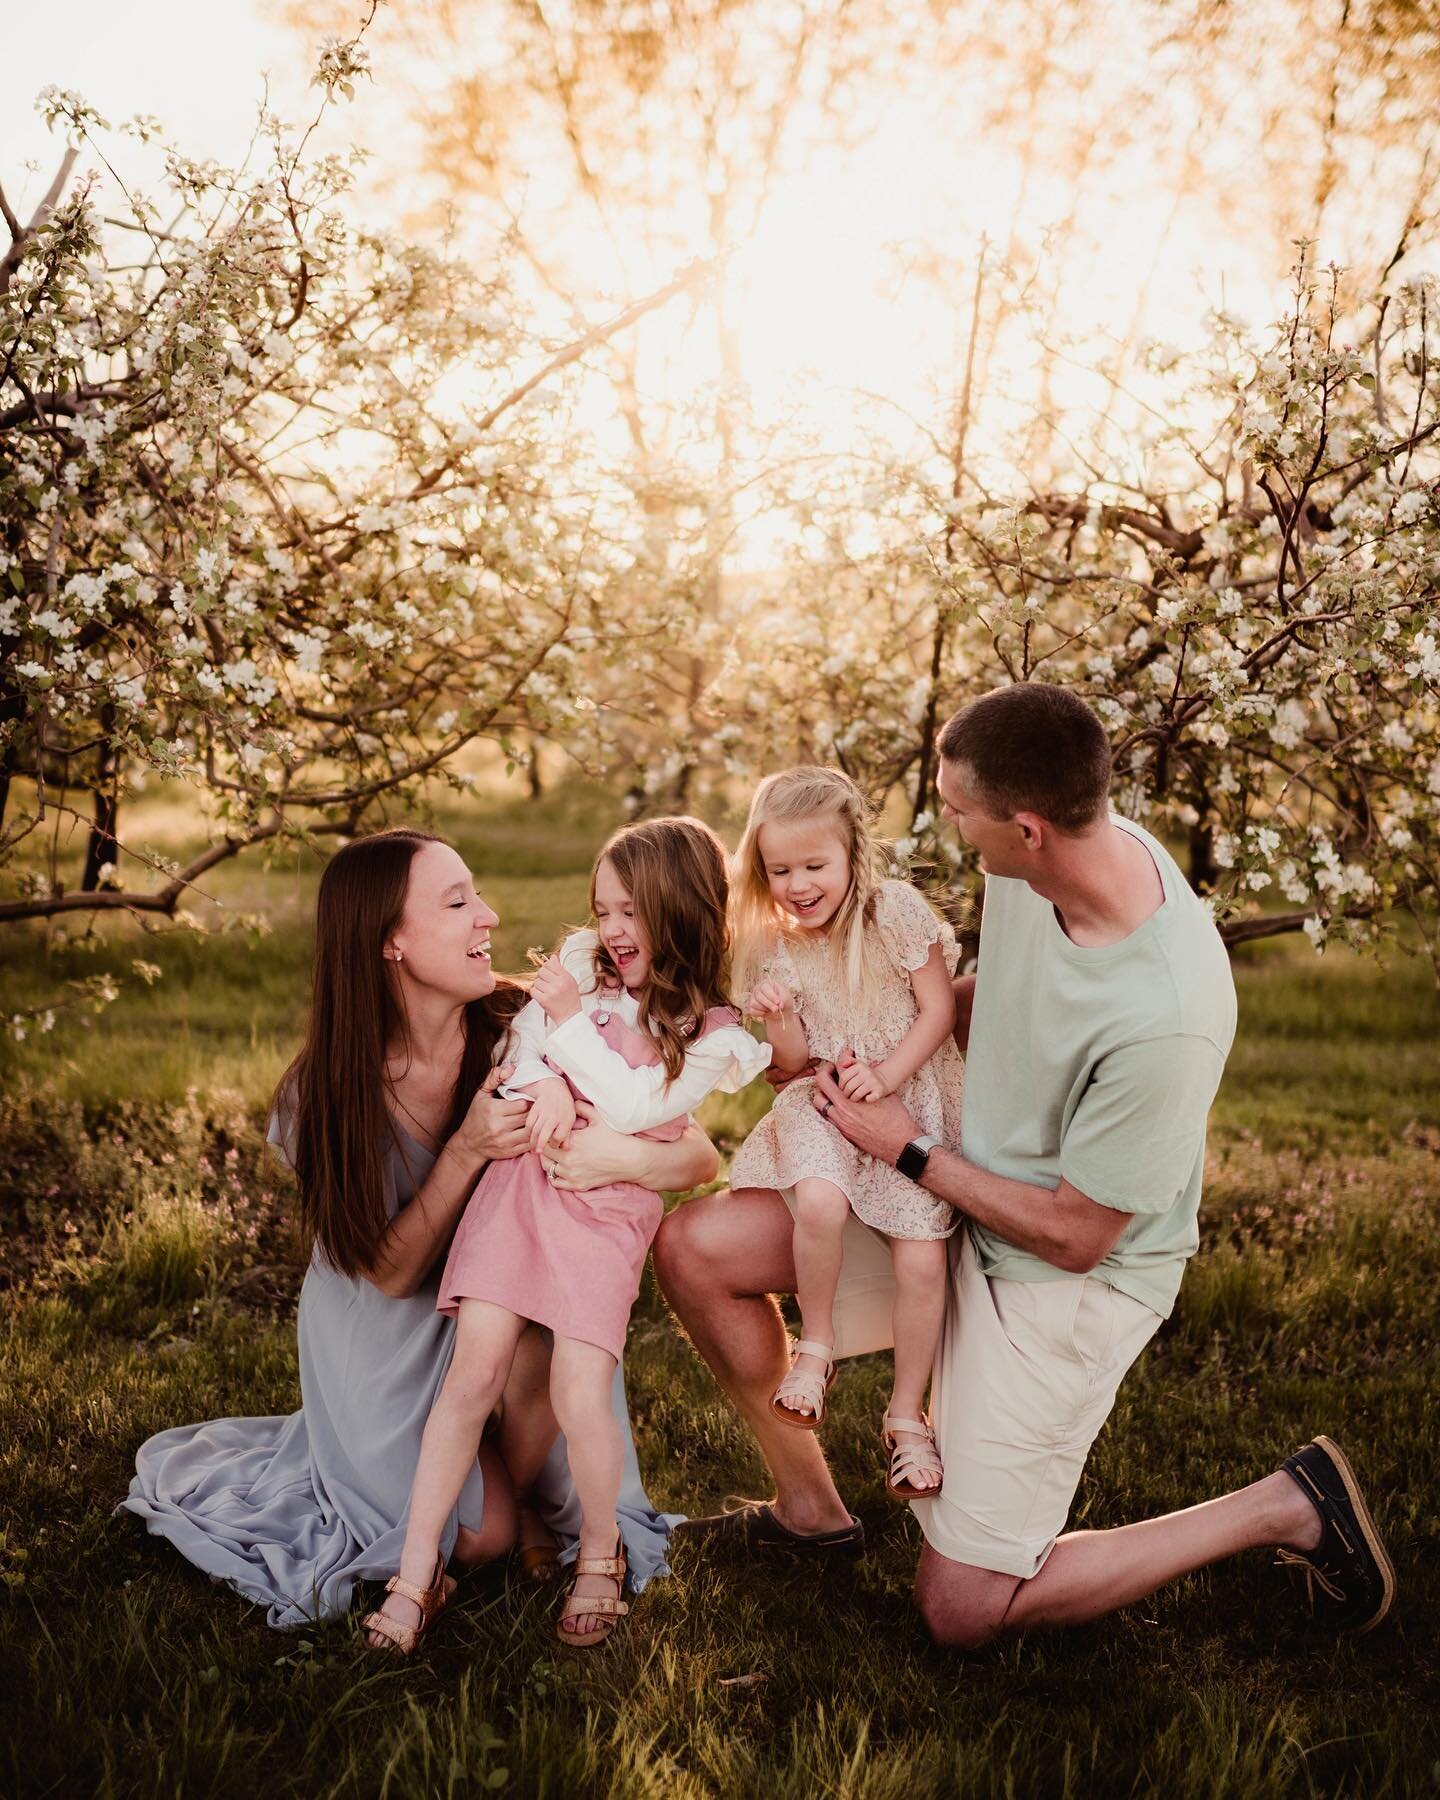 A beautiful family, beautiful apple blossoms and the perfect spring weather made for an amazing session! ✨